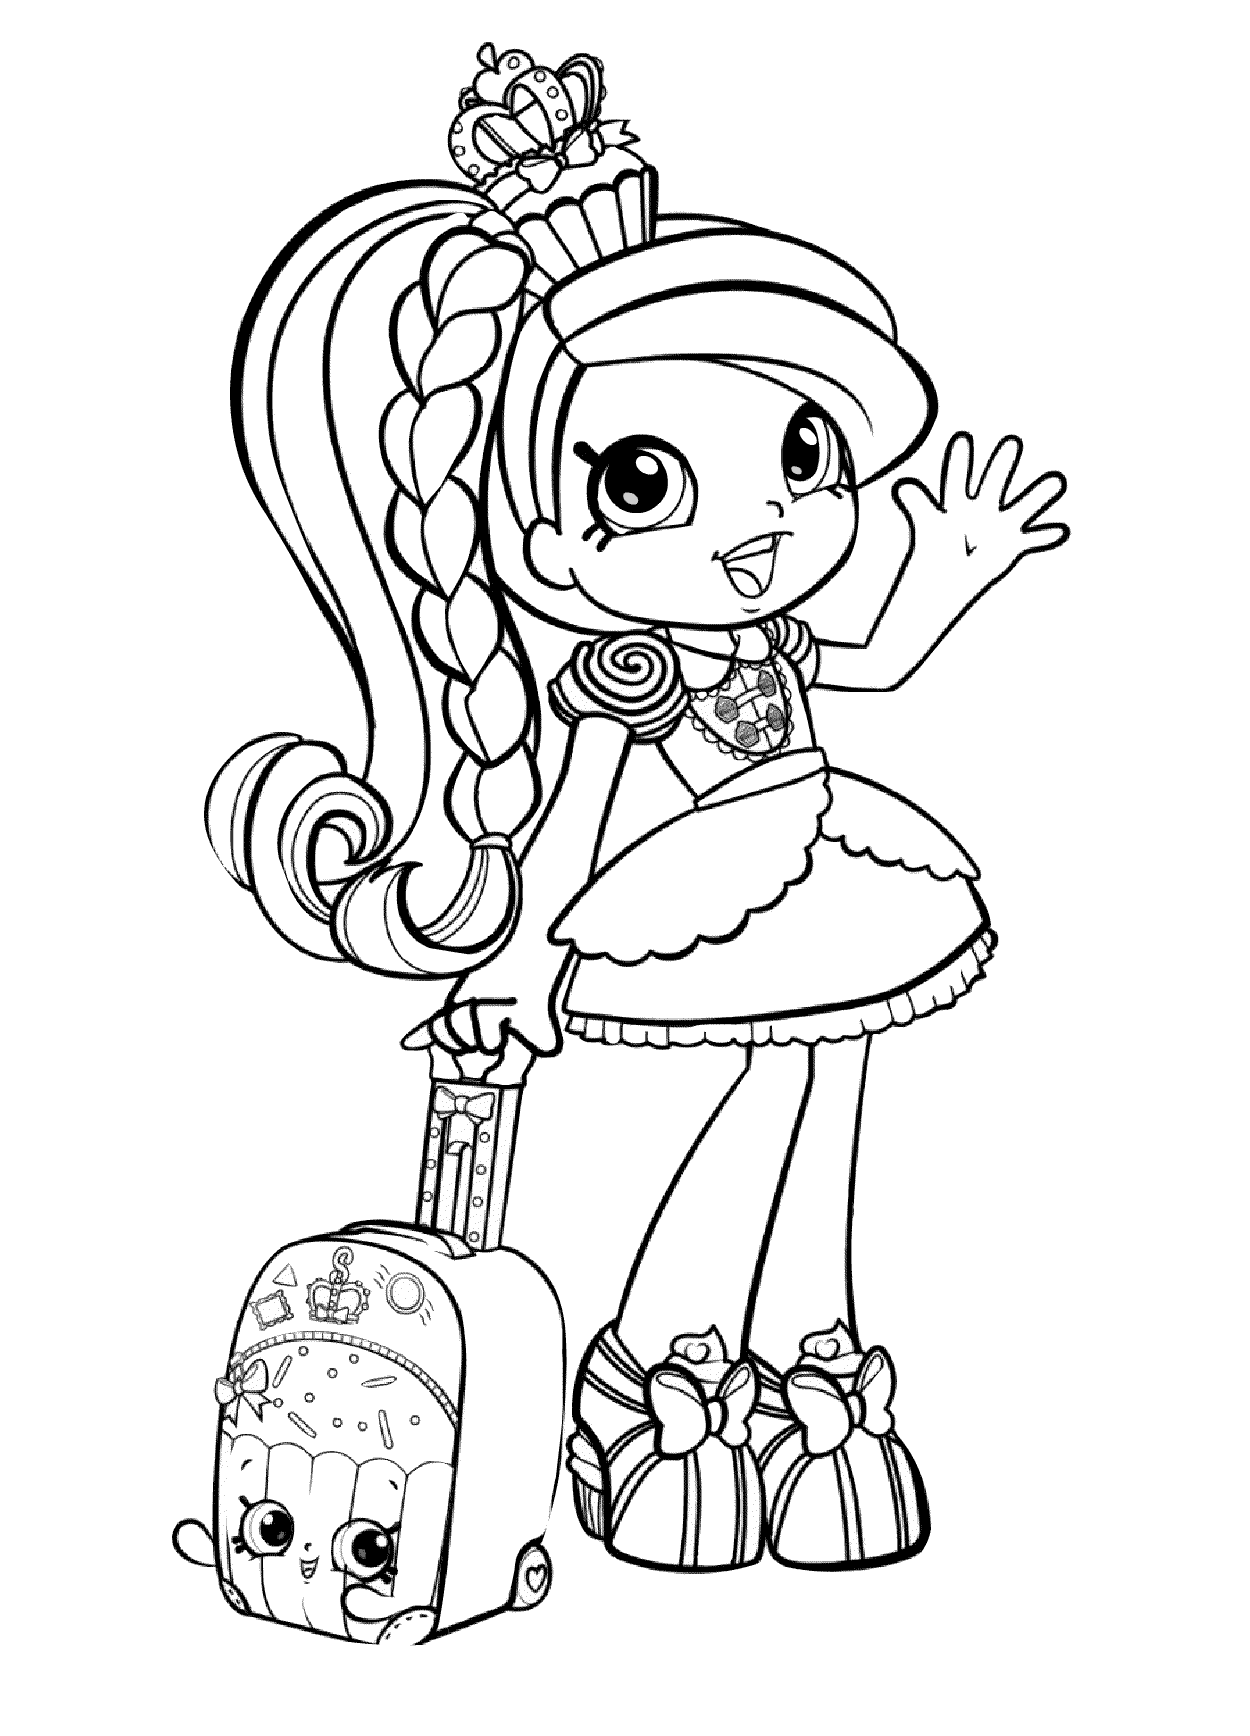 Cute Shopkins Girl with Backpack Coloring Page for Girls - Print Color ...